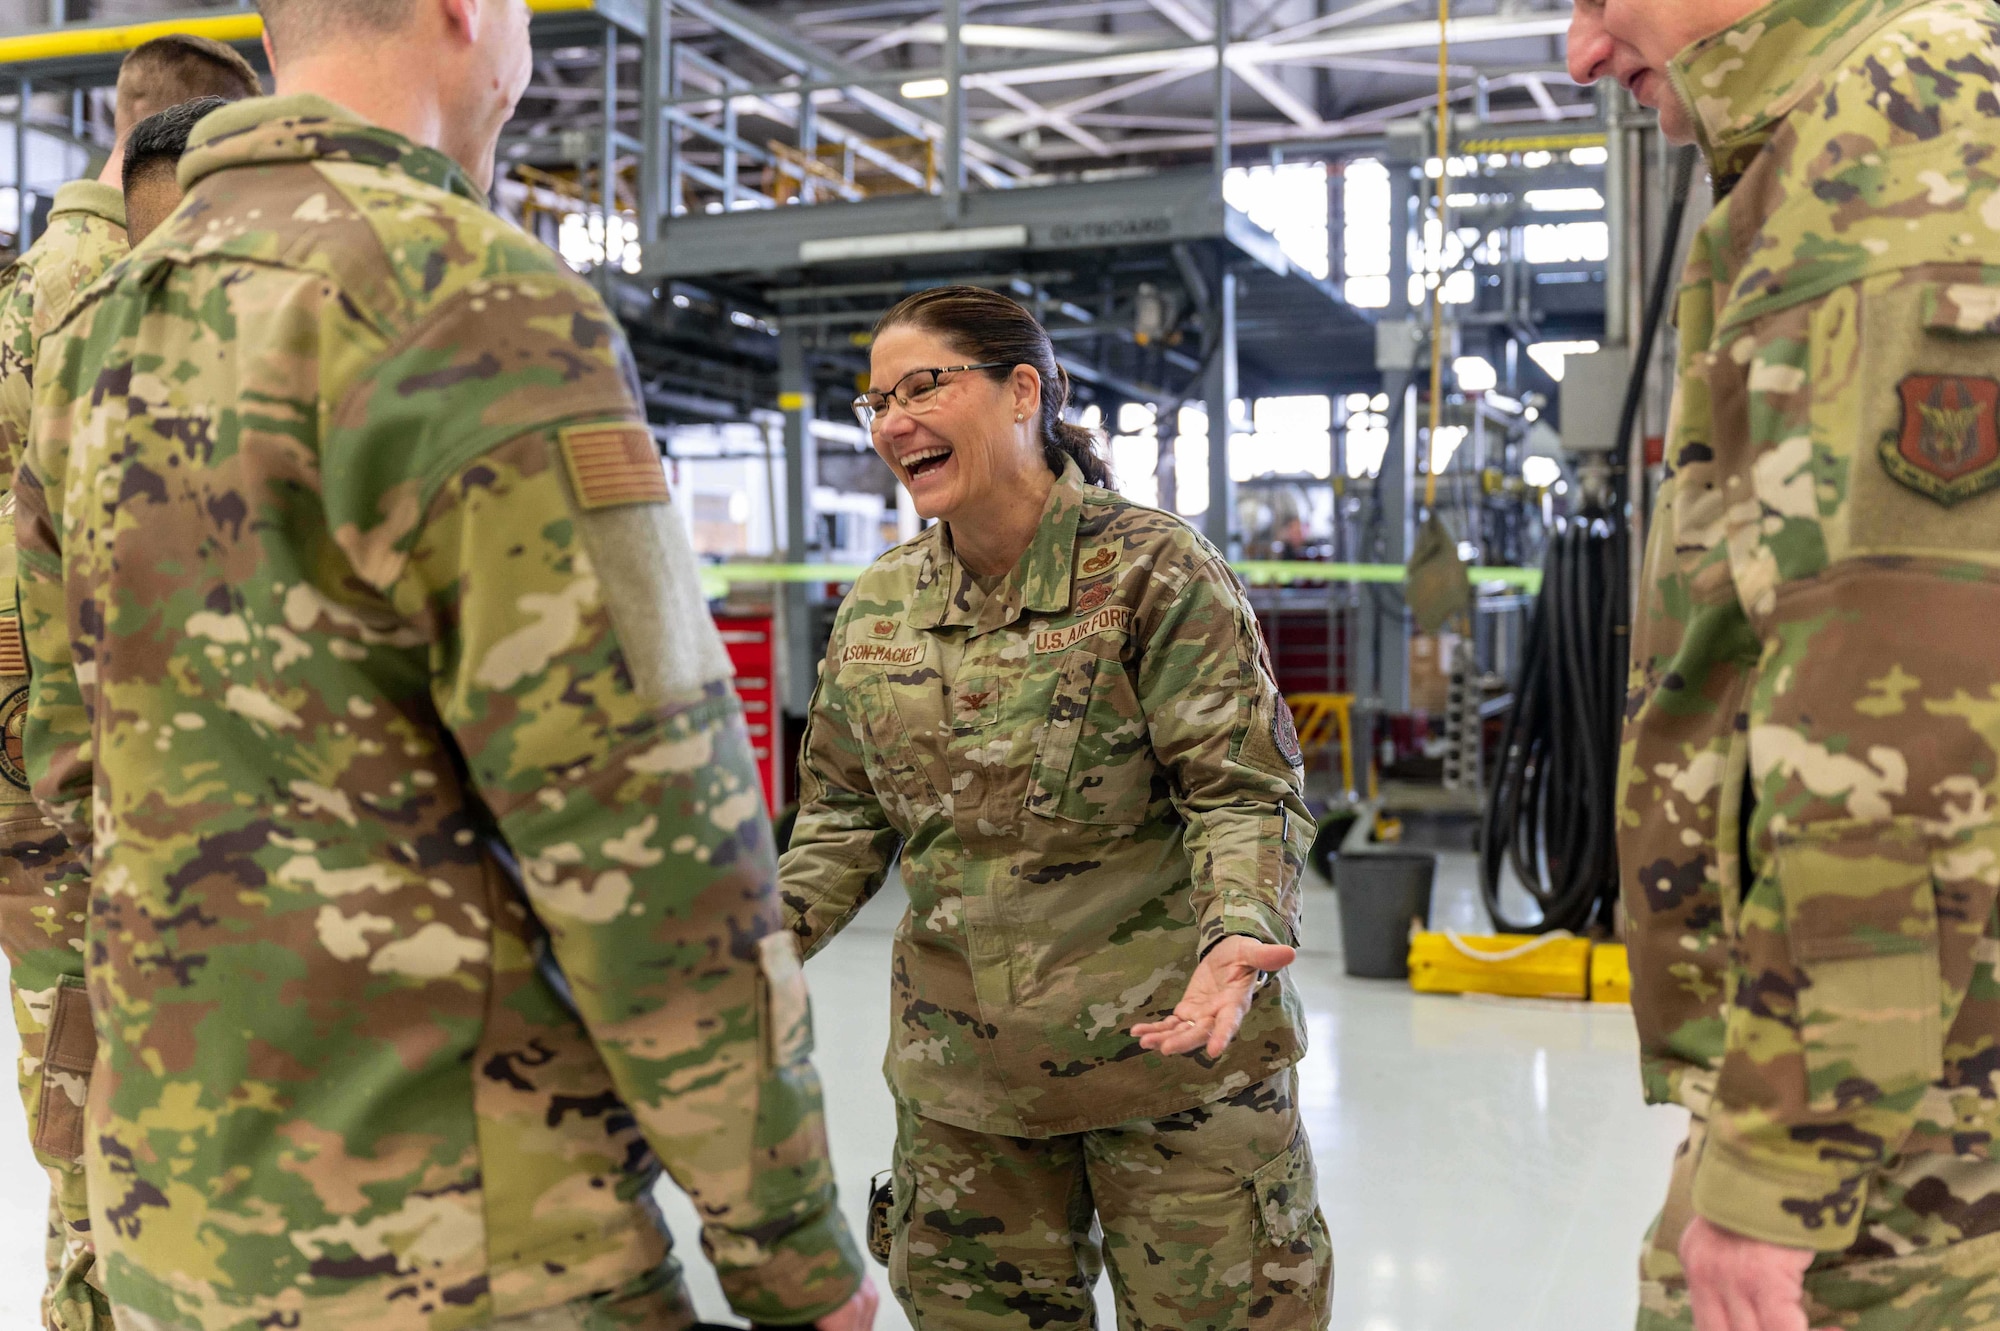 Colonel Gia Wilson-Mackey, 934th Maintenance Group commander, shares a laugh with some Airmen inside the hangar at the Minneapolis-St. Paul Air Reserve Station, Feb. 25, 2023. Wilson-Mackey will officially assume command during the March UTA. (U.S. Air Force photo by Master Sgt. Trevor Saylor)